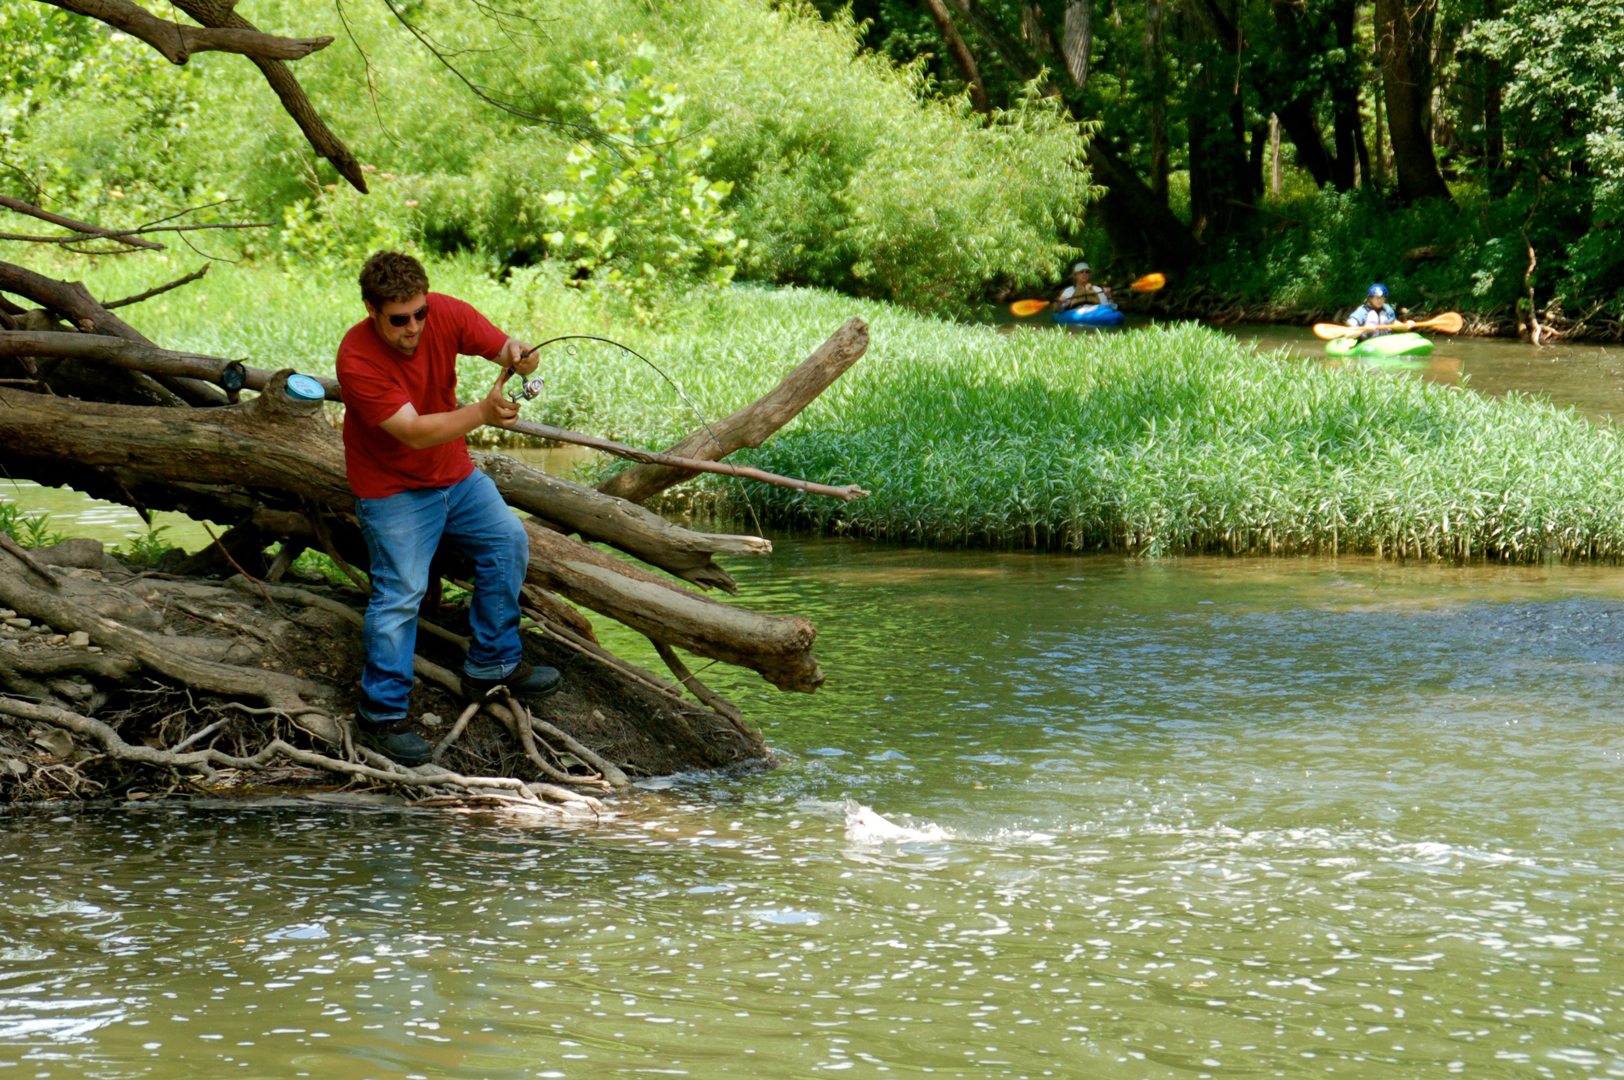 Man catches a fish from banks of Big Darby Creek in Battelle Darby Creek Metro Park.